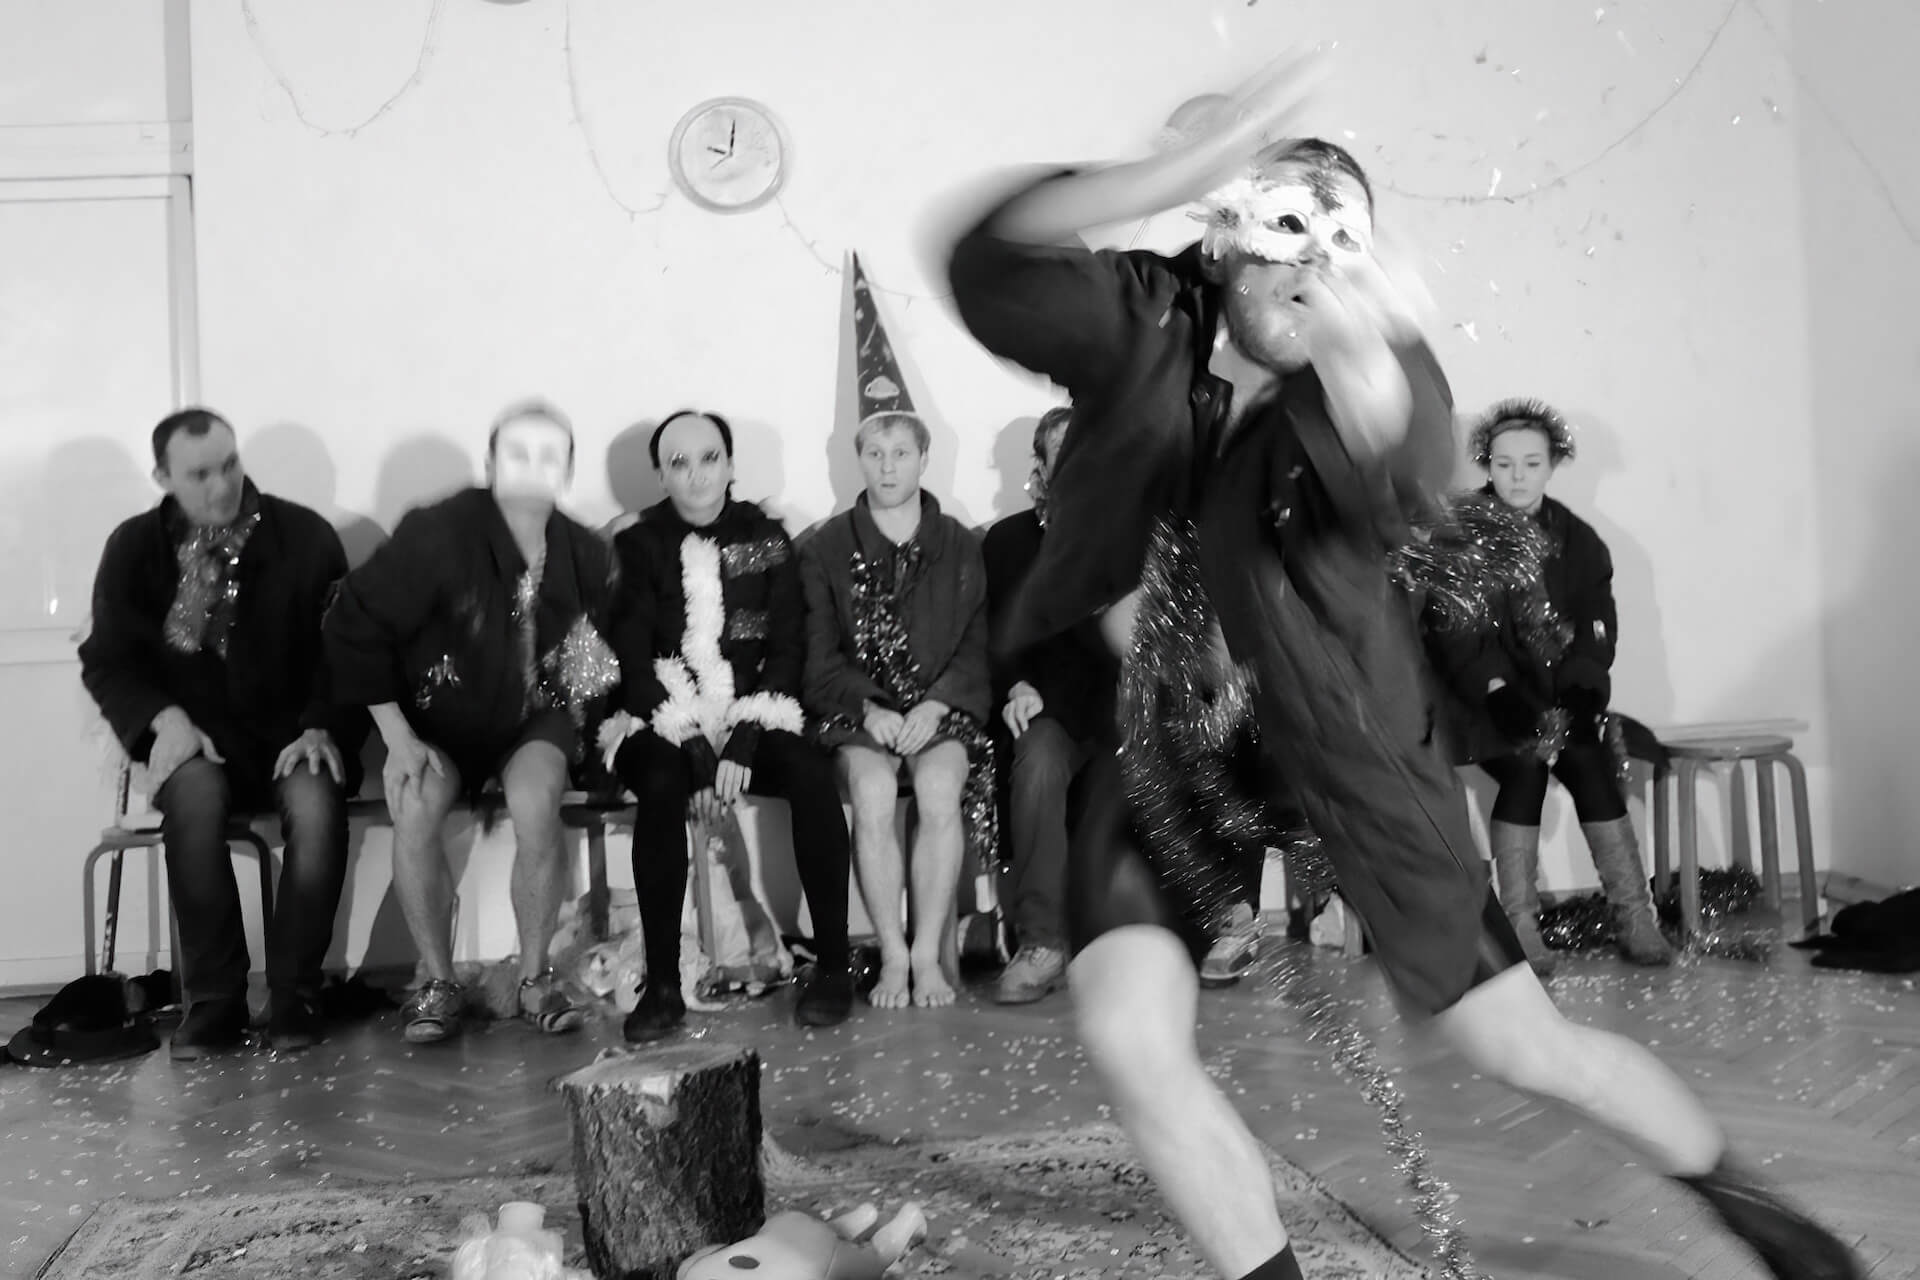 Black and white image of a performer in the middle ripping something sparkly apart vigorously. The others are sitting on a chair by the wall and are watching.